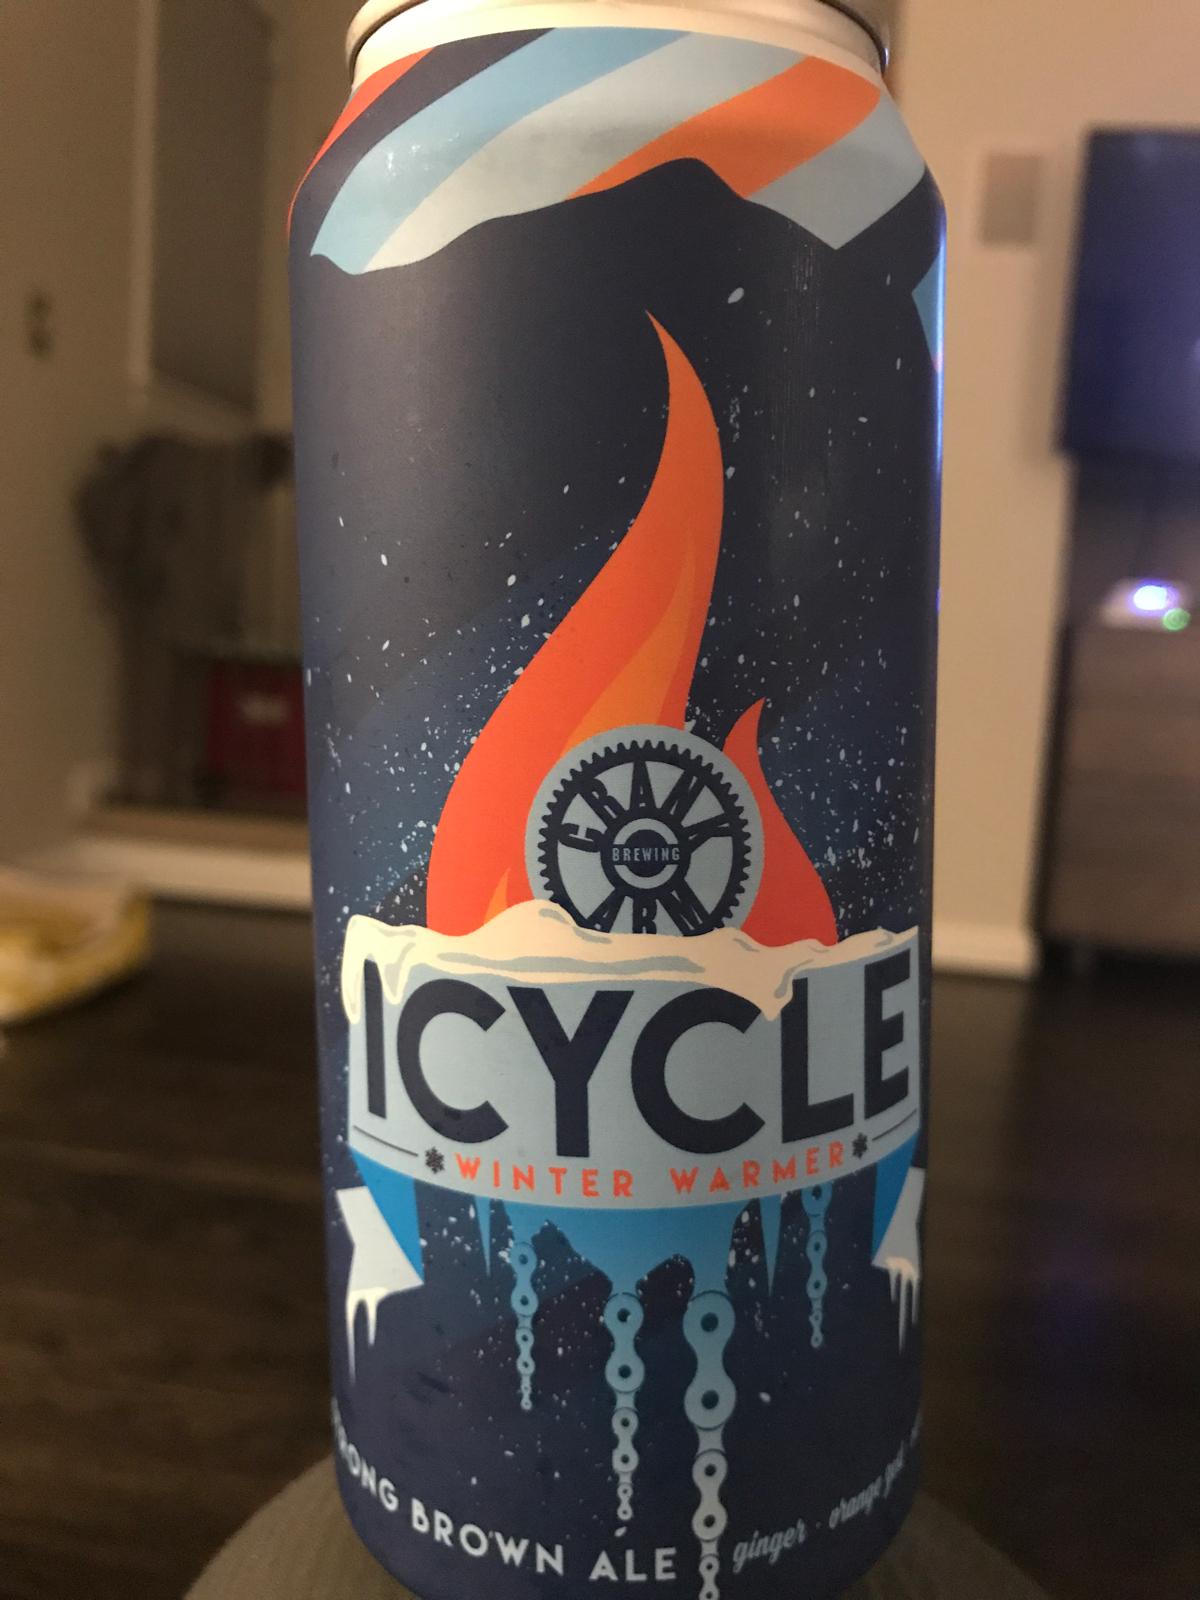 Icycle Winter Warmer